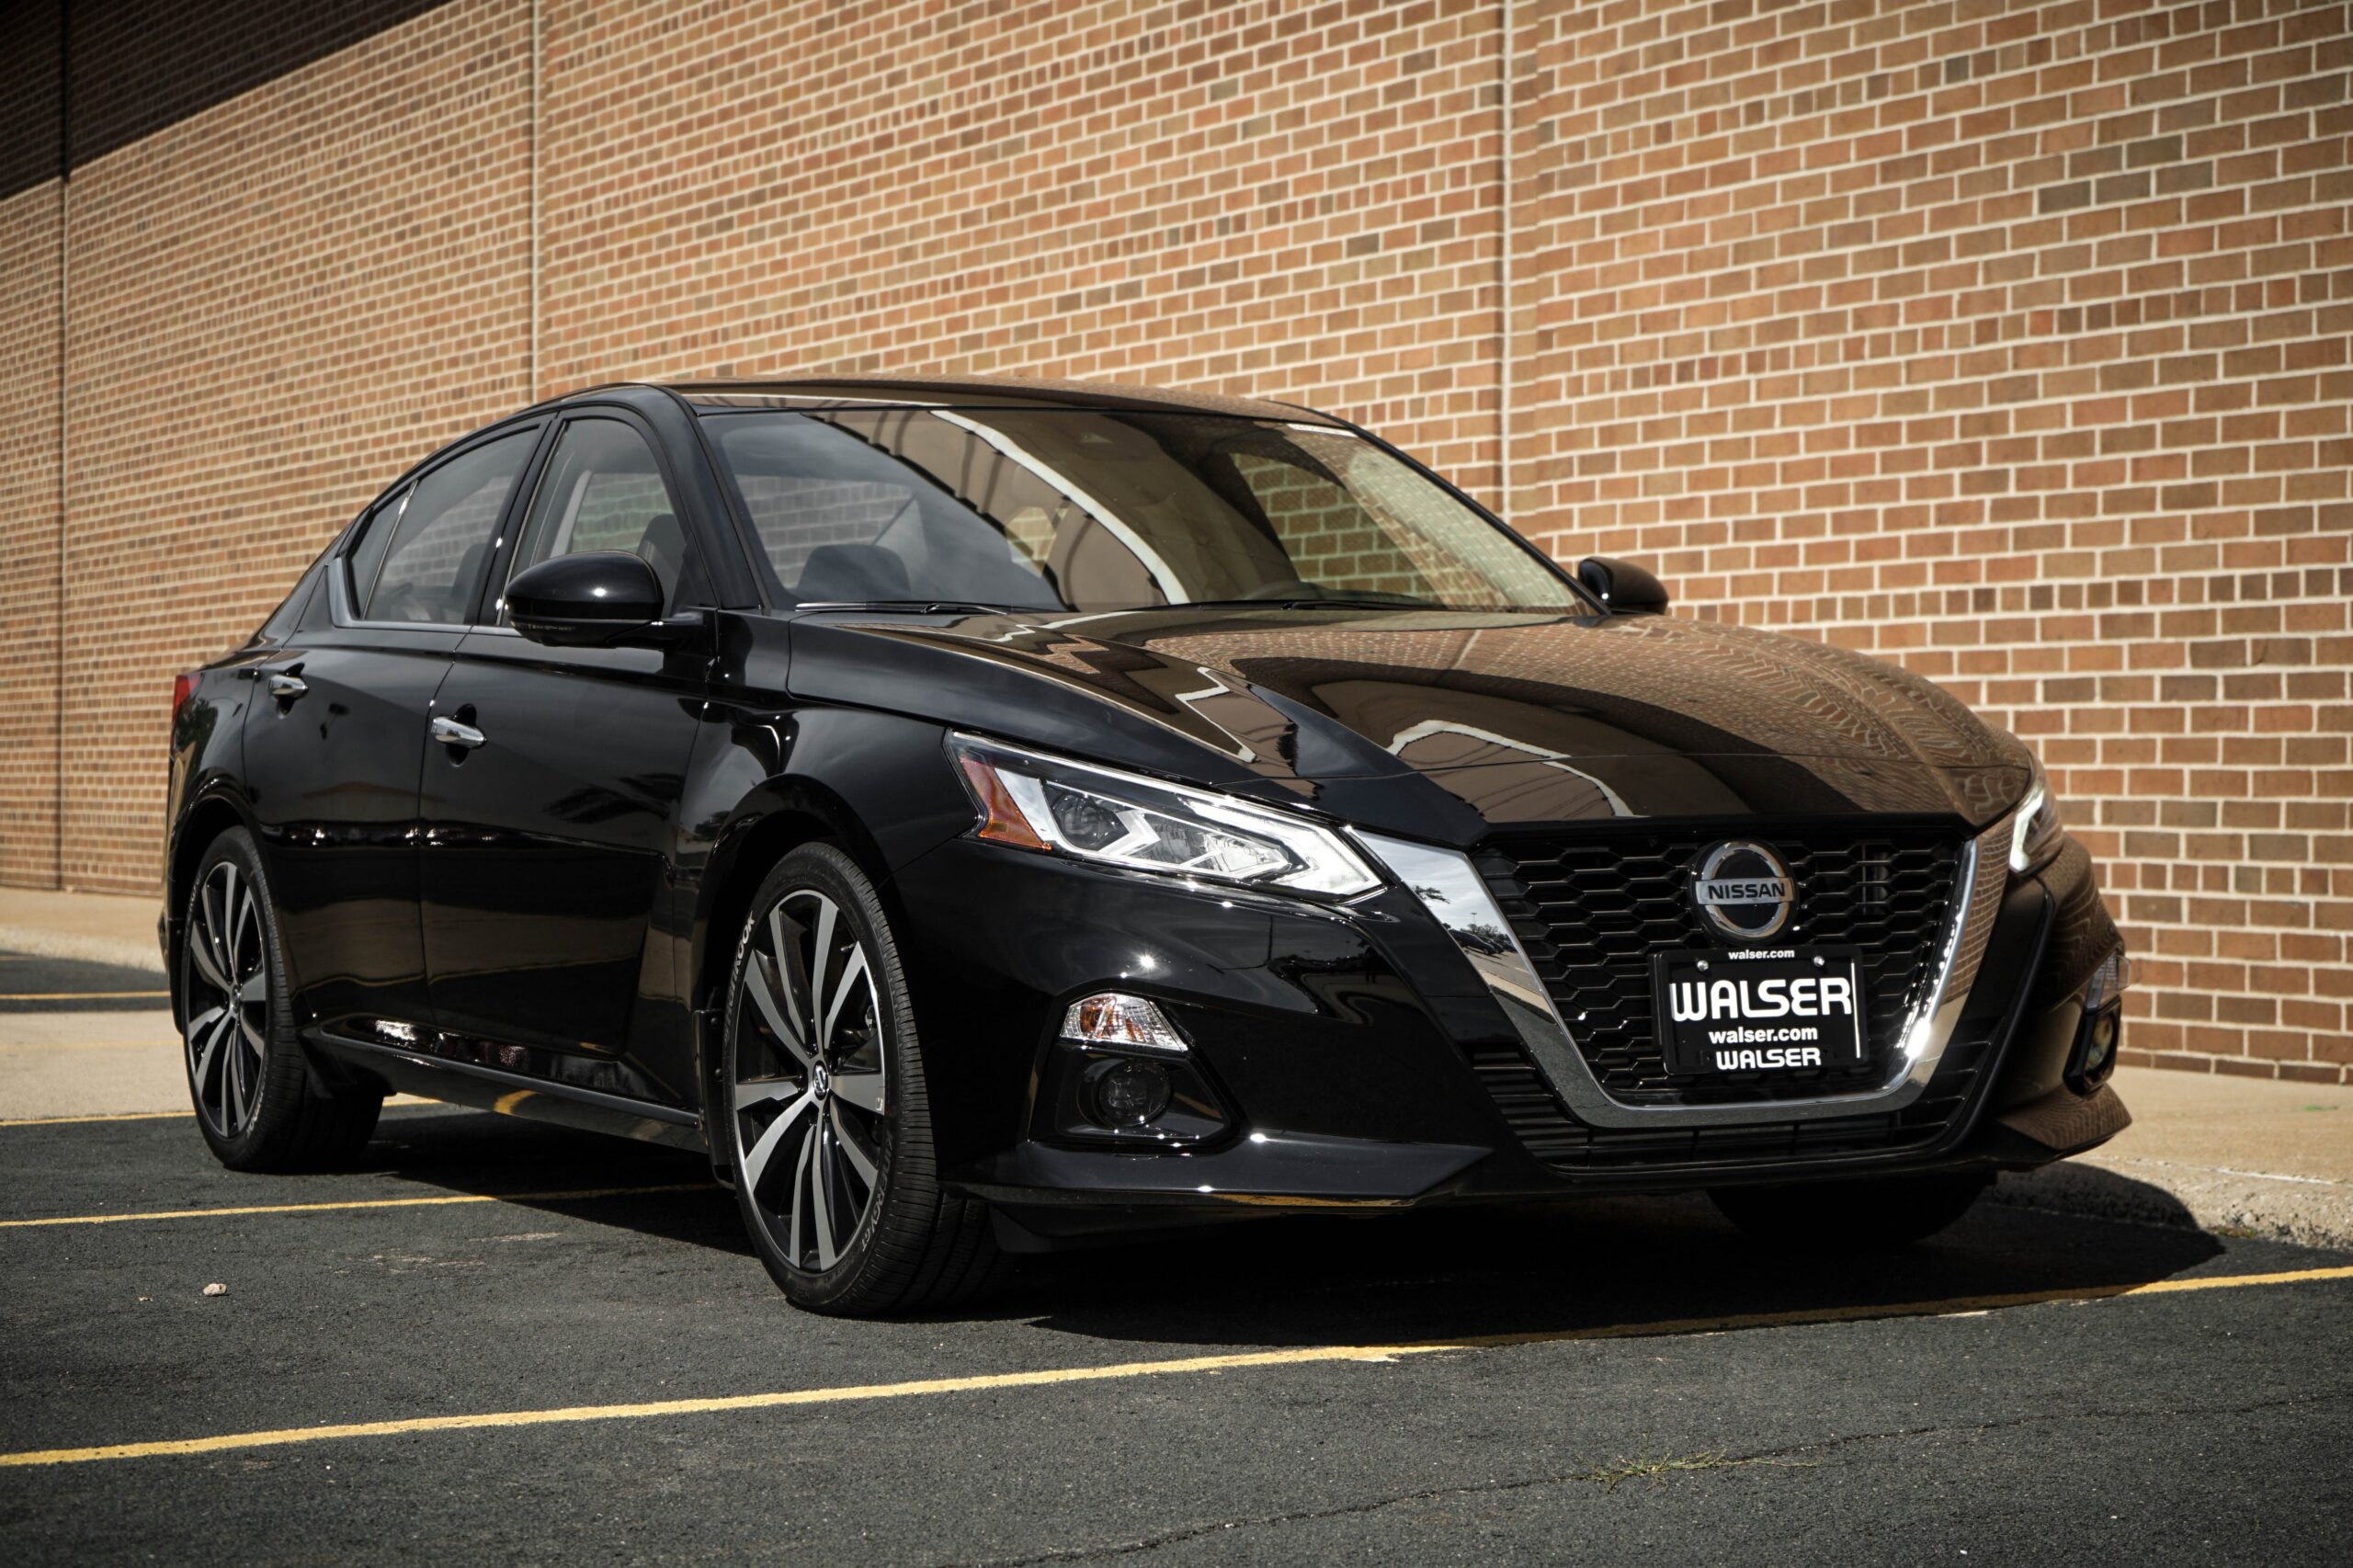 How Much to Lease a Nissan Altima